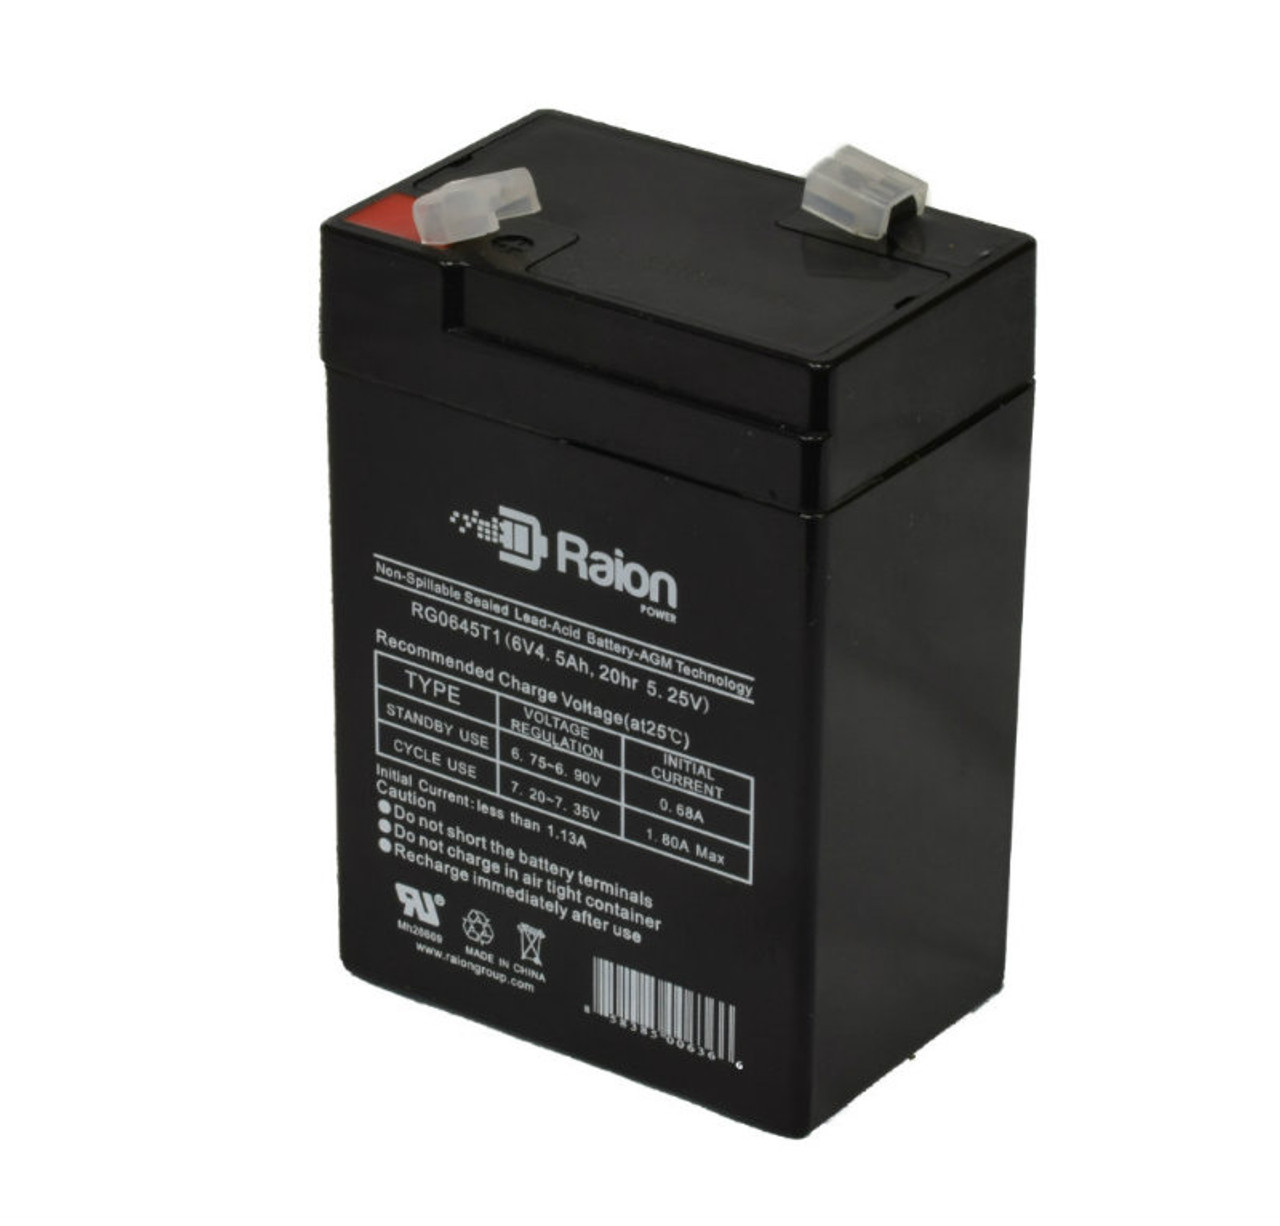 Raion Power RG0645T1 6V 4.5Ah Replacement Battery Cartridge for Power Energy HR6-24W